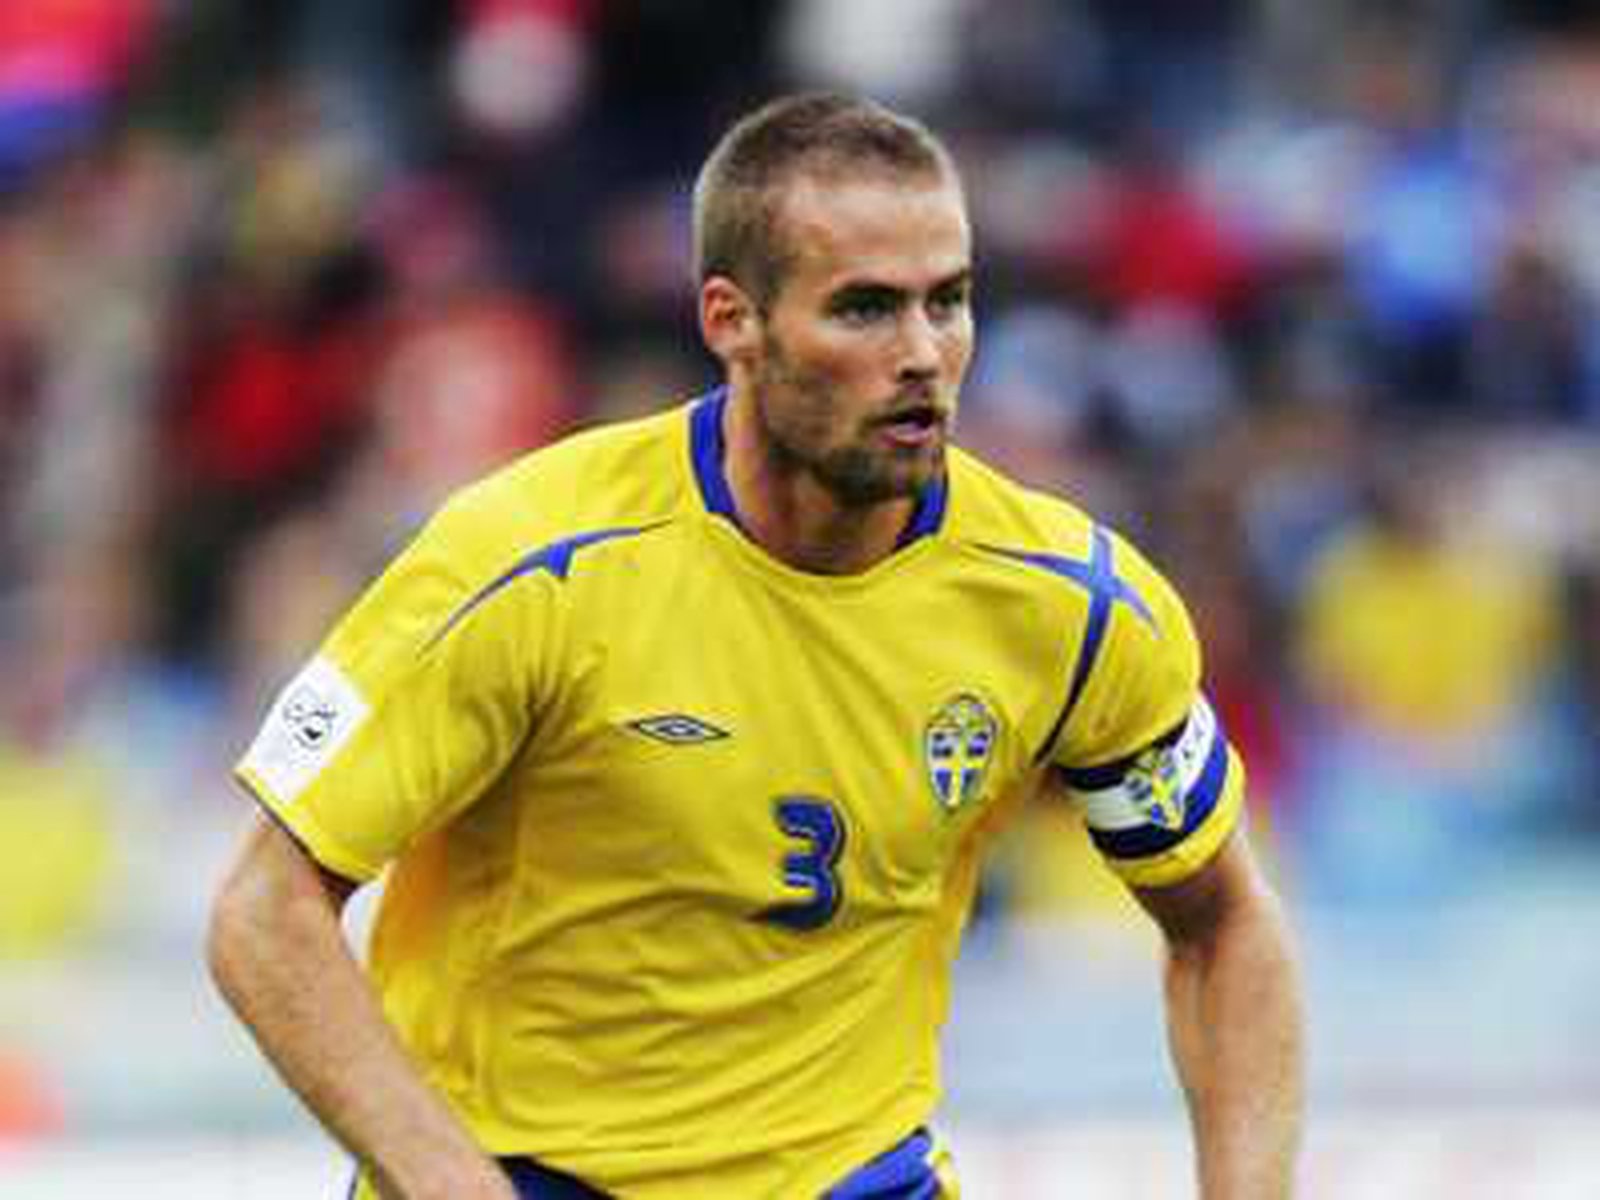 Mellberg to continue on with Swedes